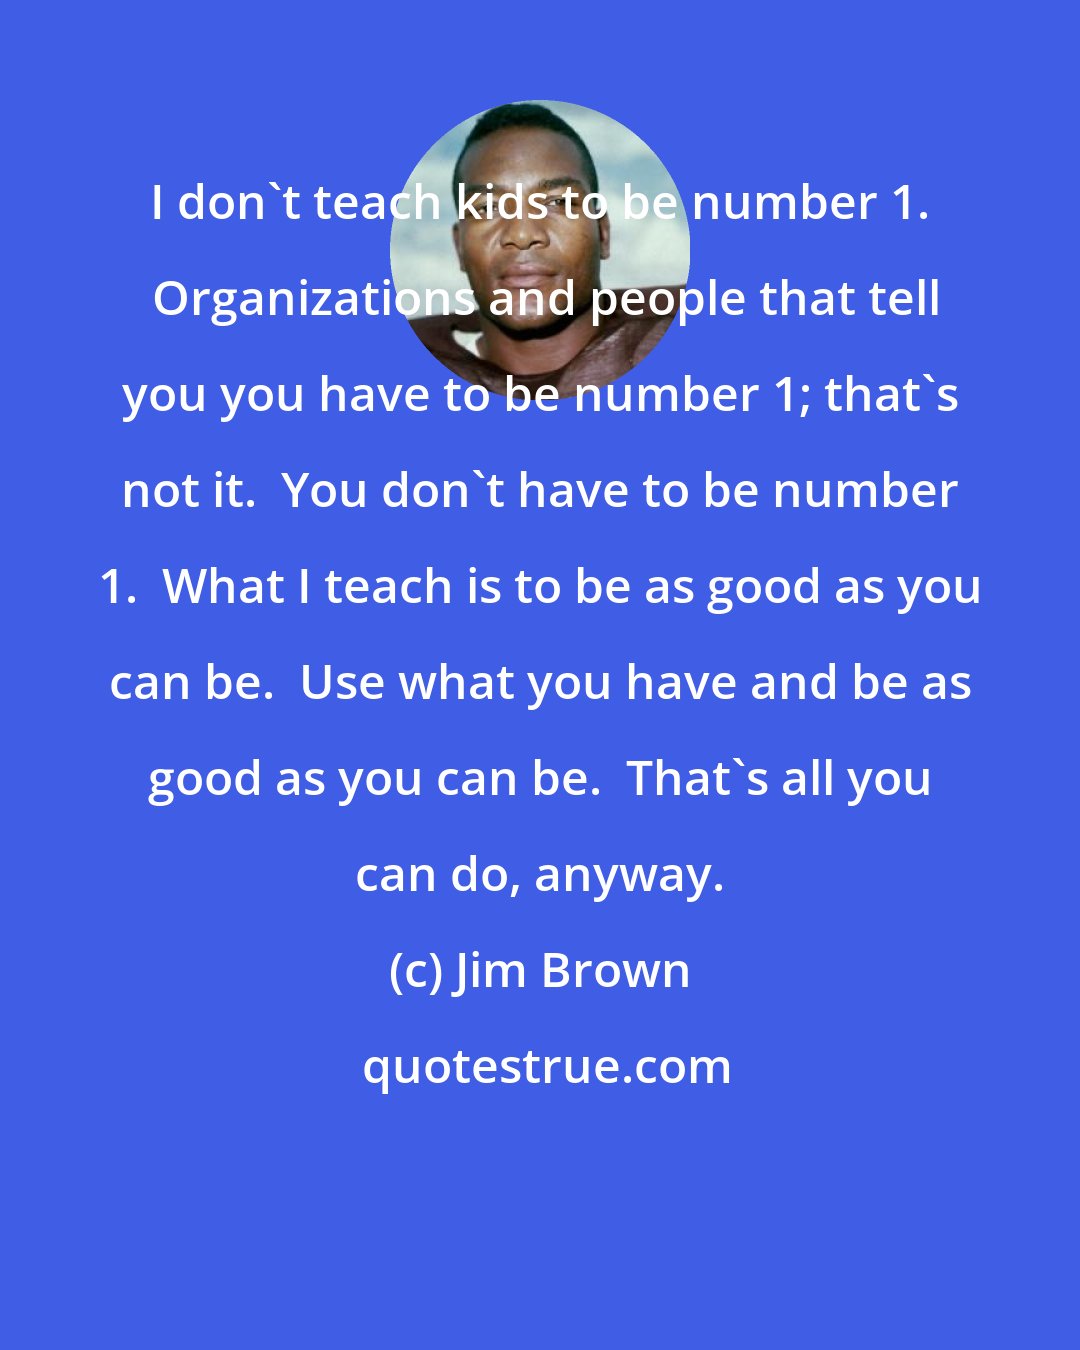 Jim Brown: I don't teach kids to be number 1.  Organizations and people that tell you you have to be number 1; that's not it.  You don't have to be number 1.  What I teach is to be as good as you can be.  Use what you have and be as good as you can be.  That's all you can do, anyway.